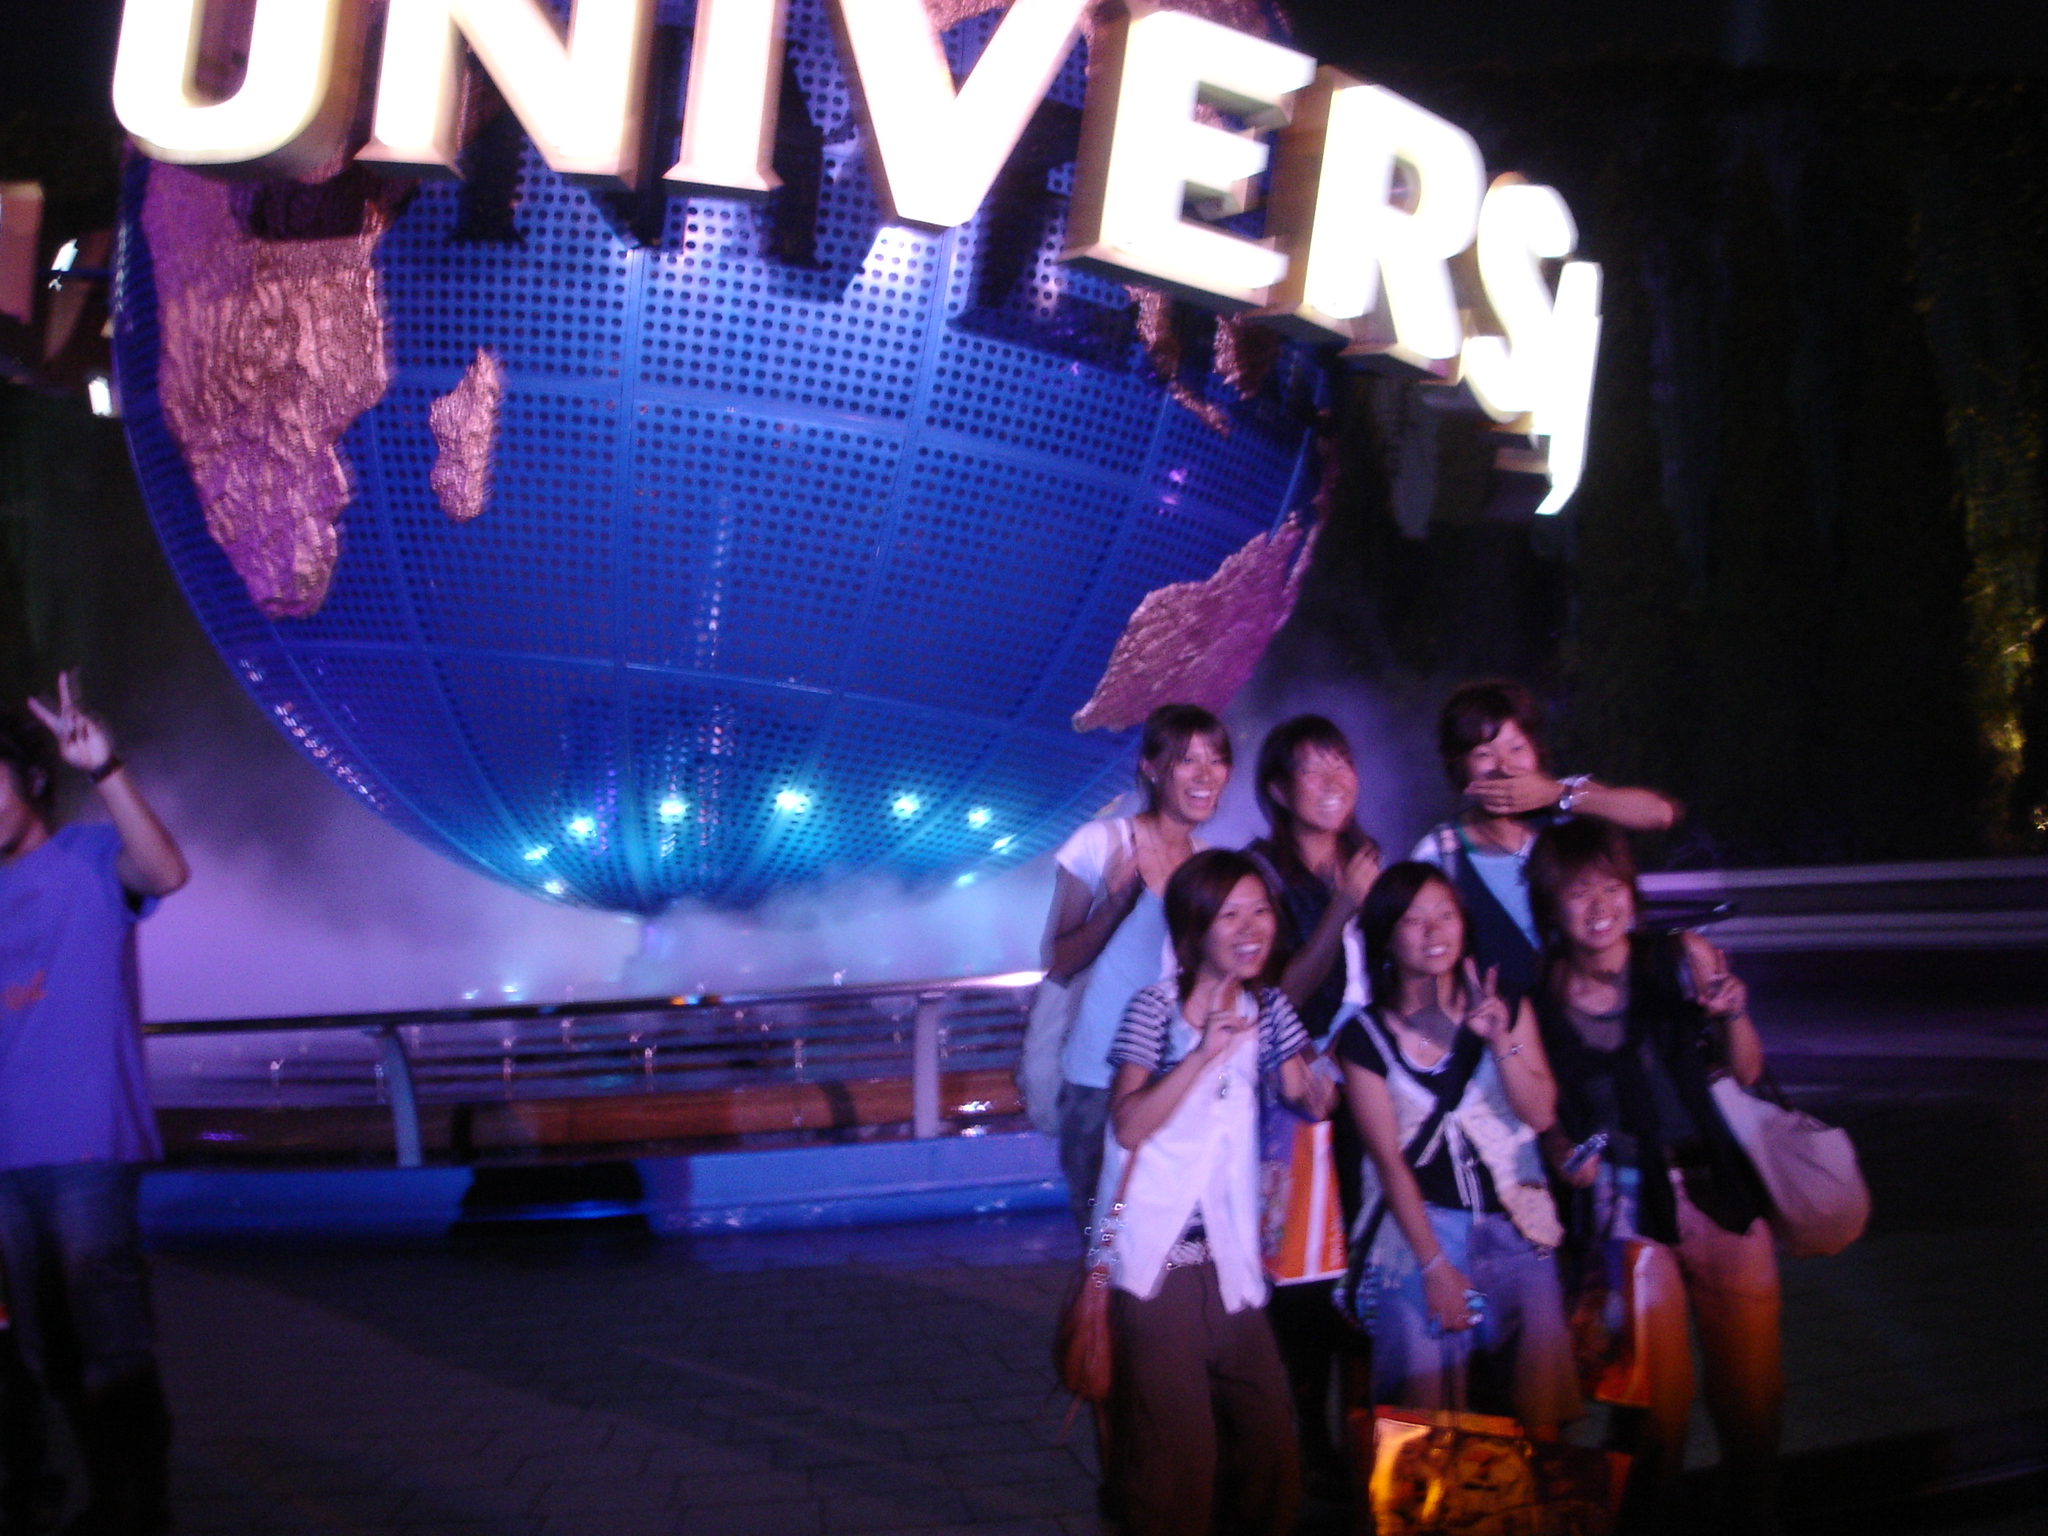 a group of people posing in front of the letters'university '